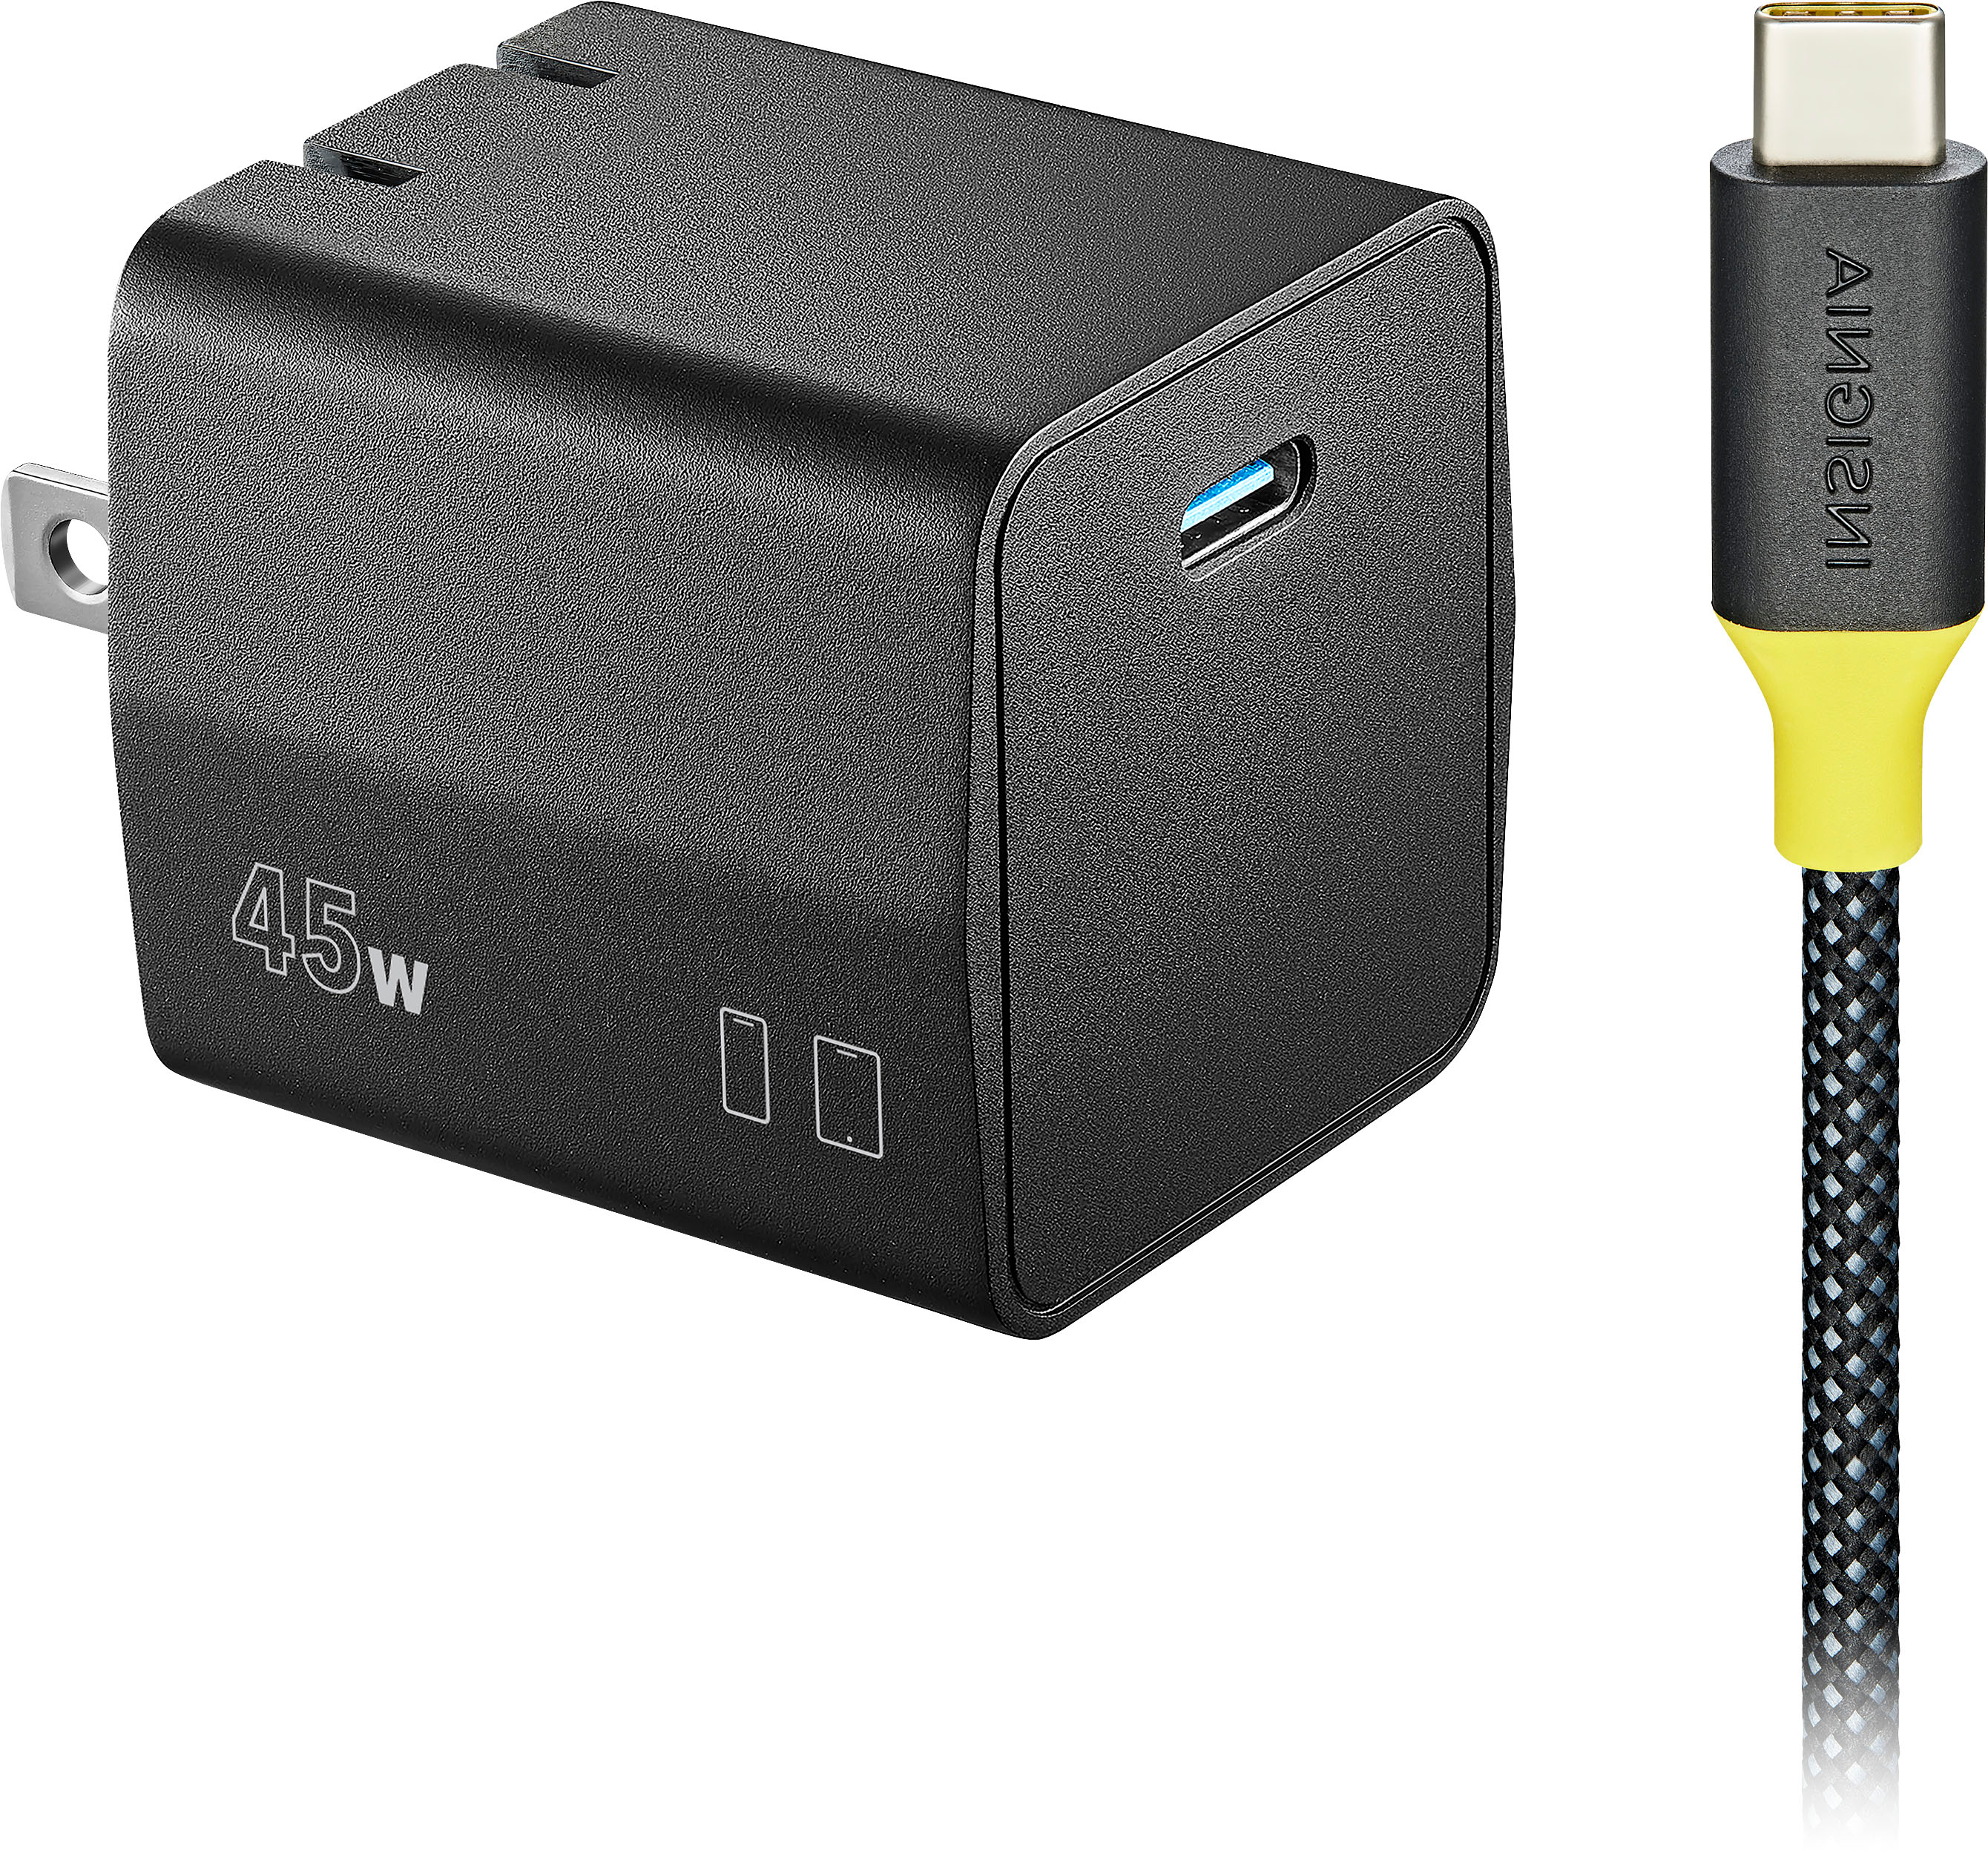 Anker Nano II 45W PPS USB-C Fast Wall Charger with GaN for Samsung